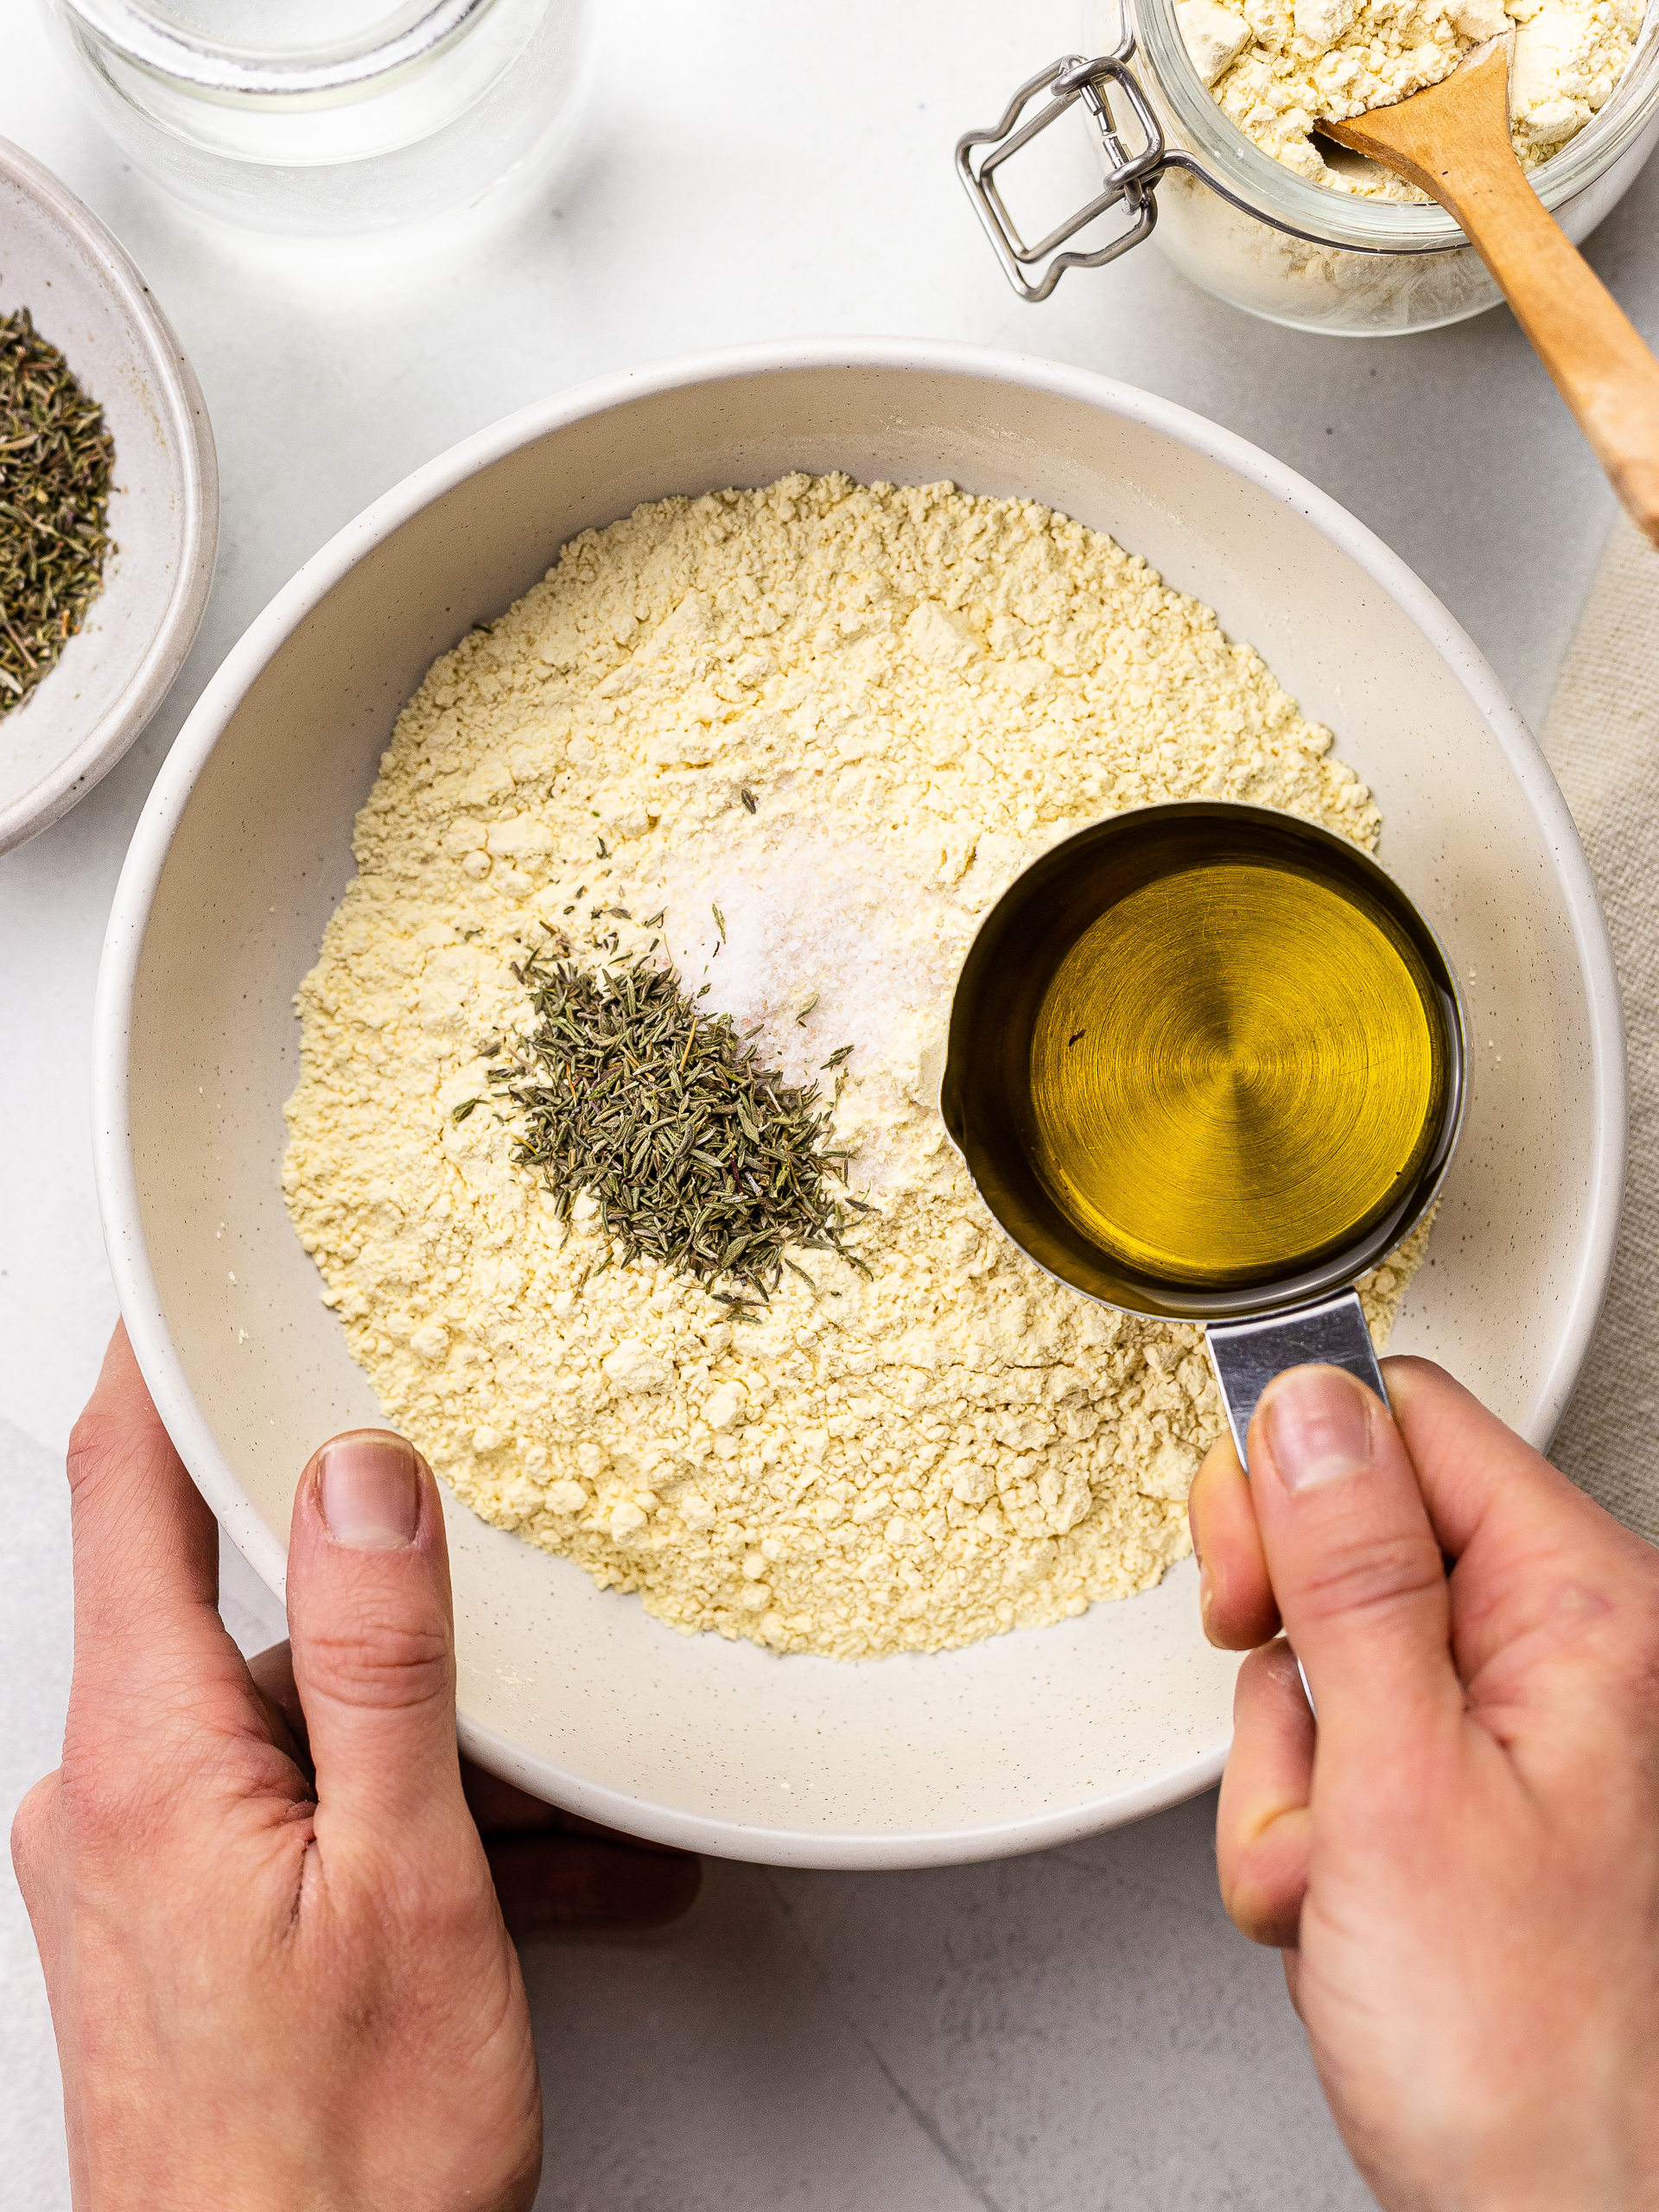 chickpea flour, oil, thyme and salt in a bowl for crackers